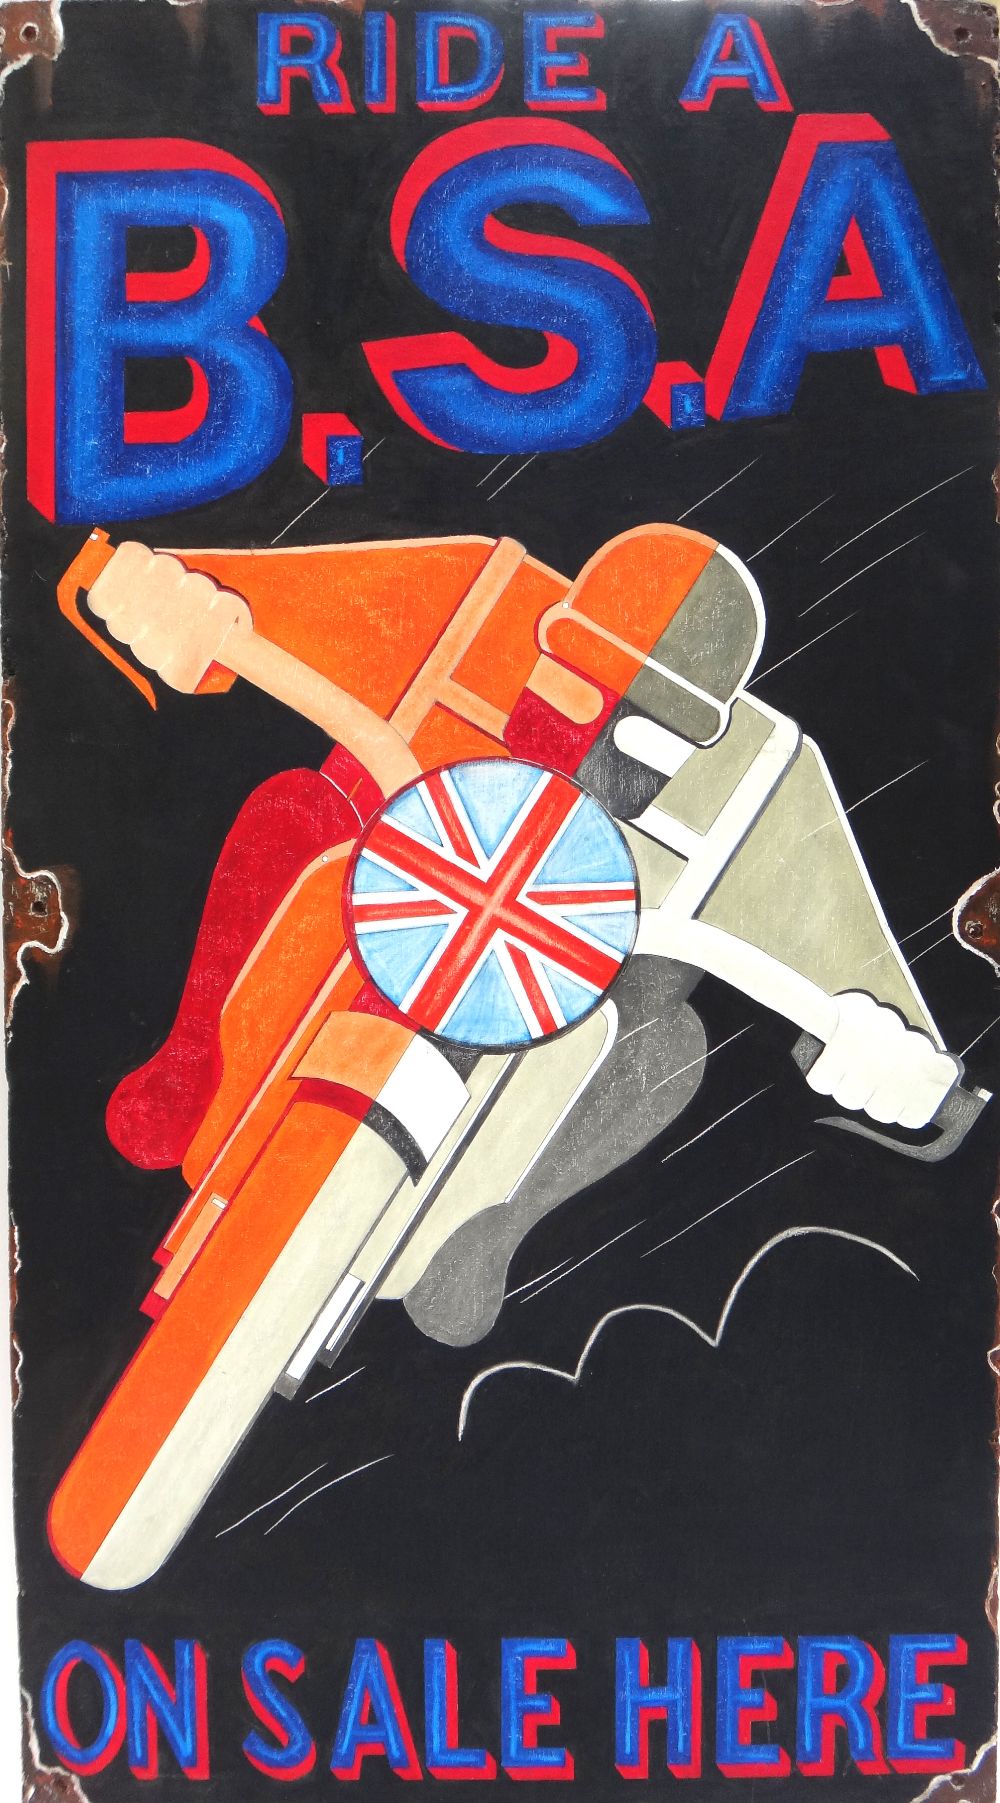 A 20th century reproduction on wood of an early BSA motorbike advertising sign,